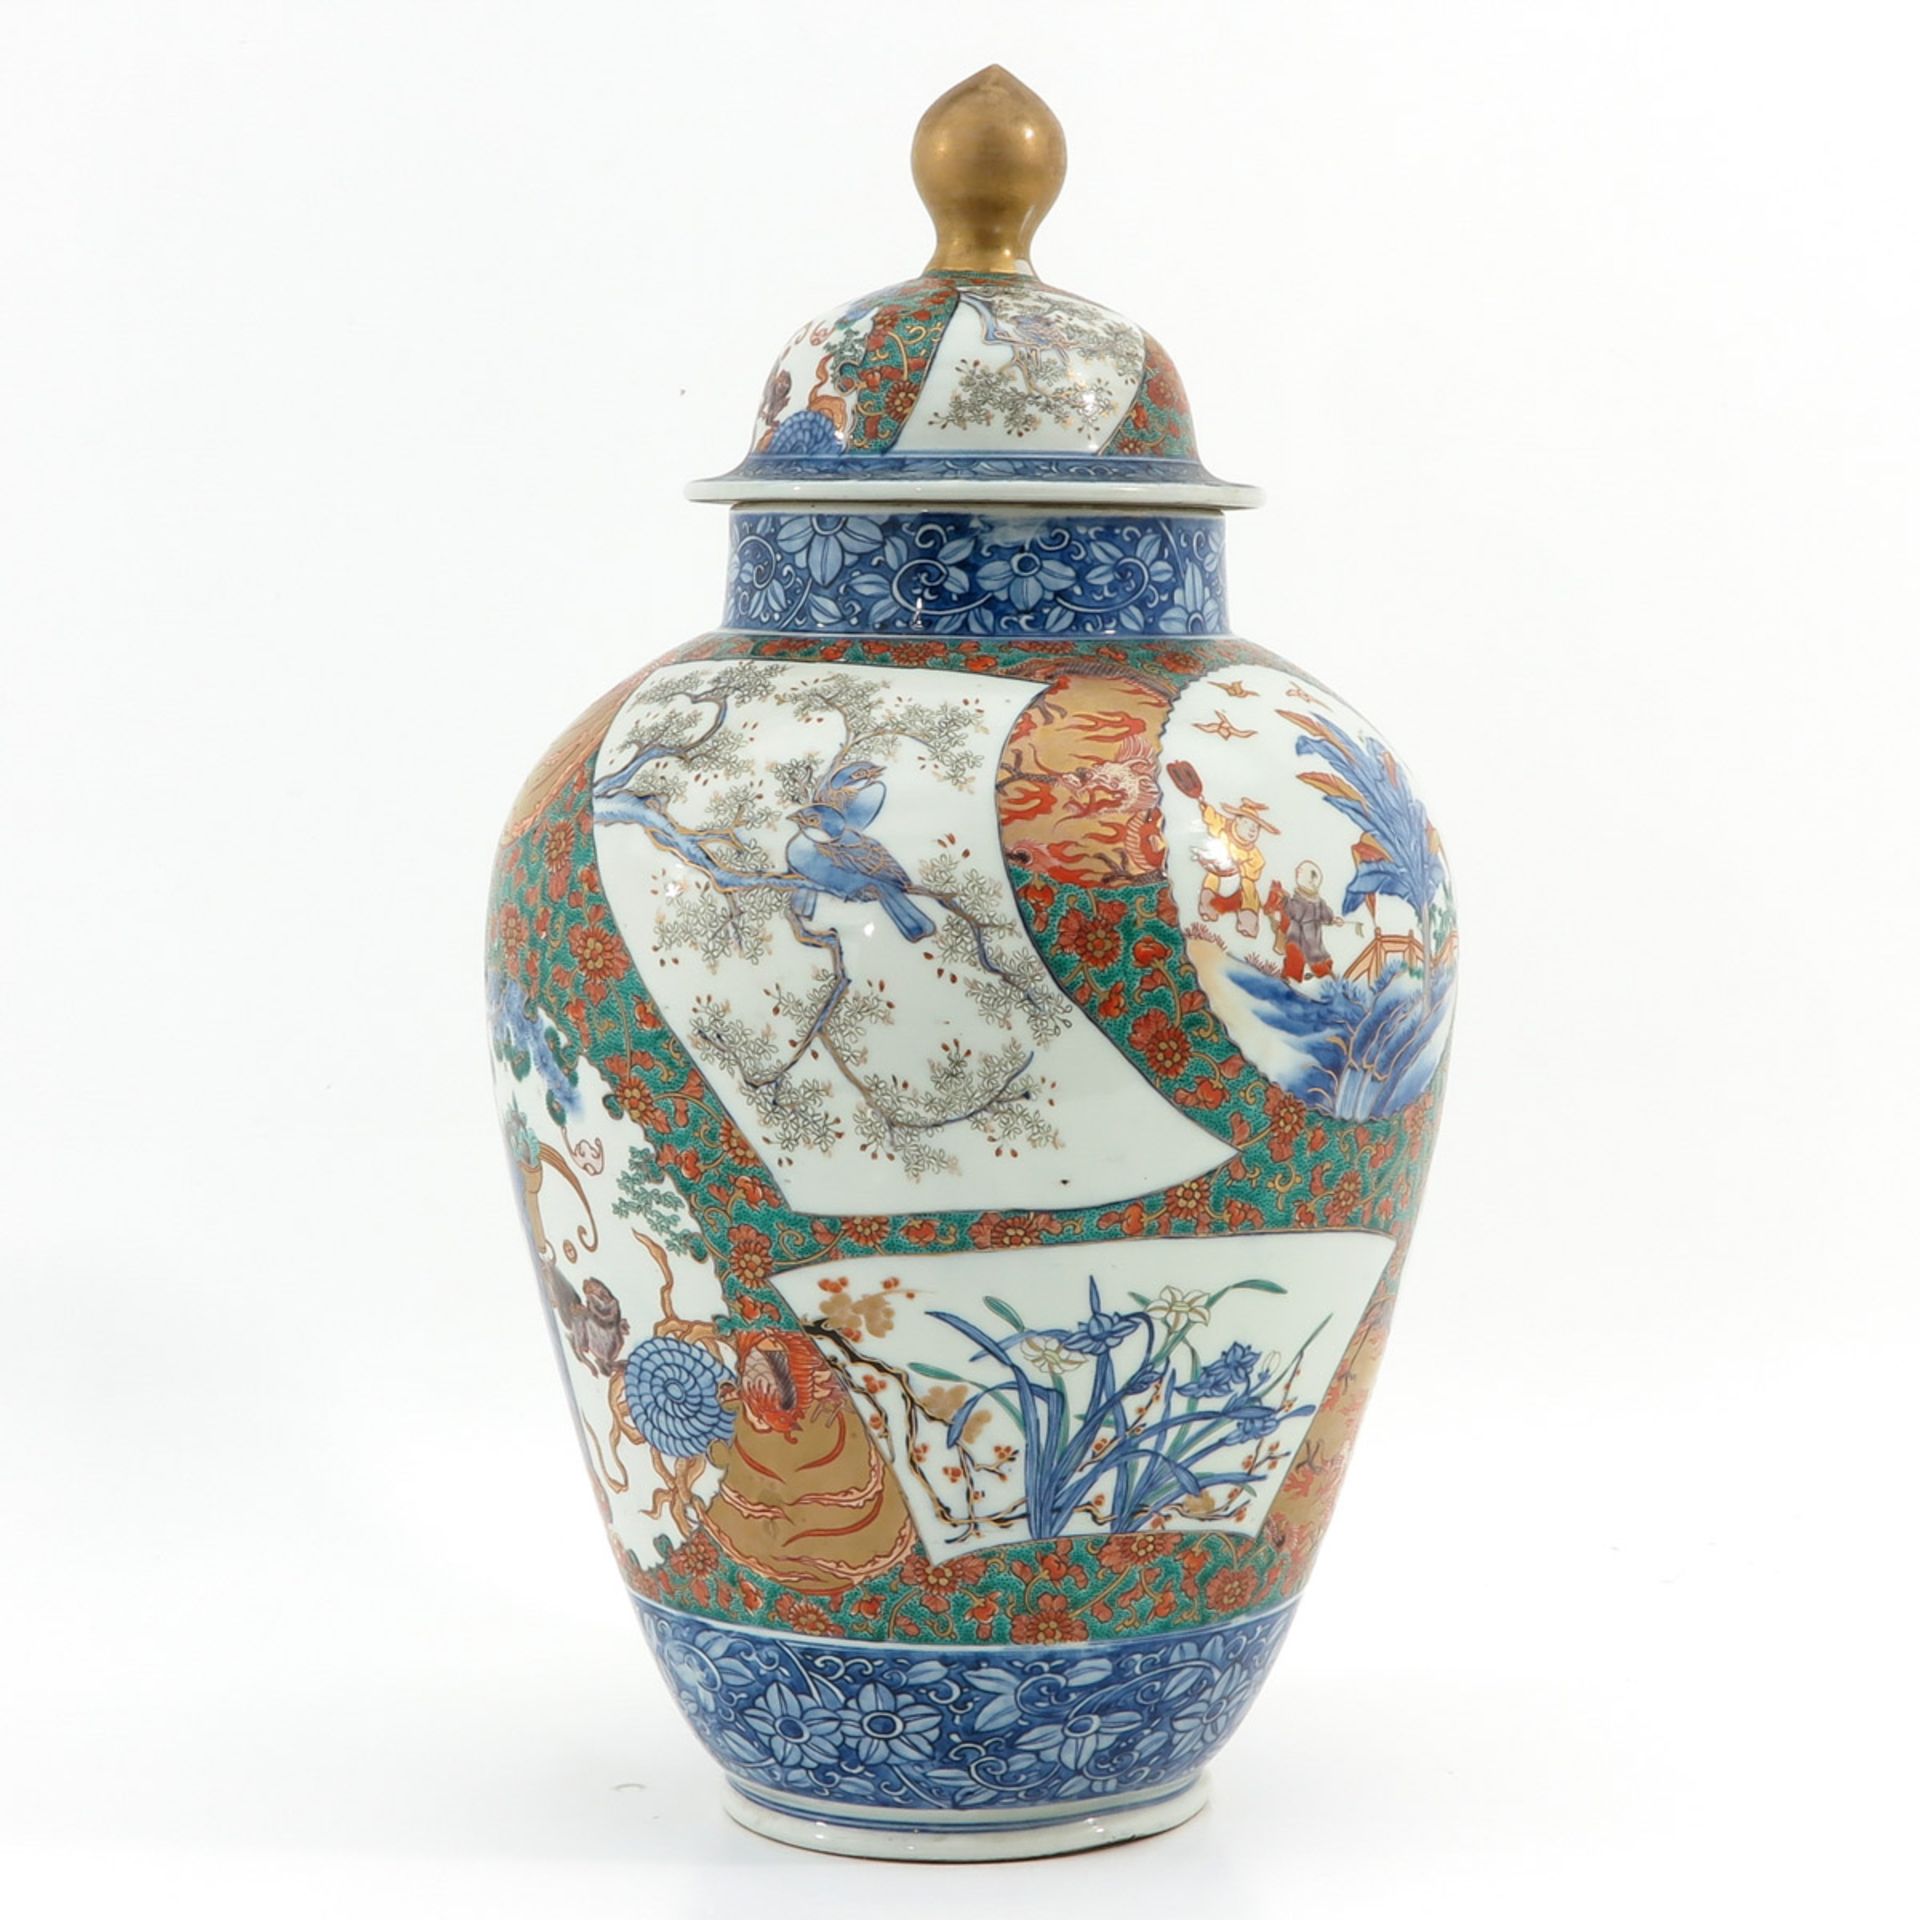 A Polychrome Decor Jar with Cover - Image 2 of 10